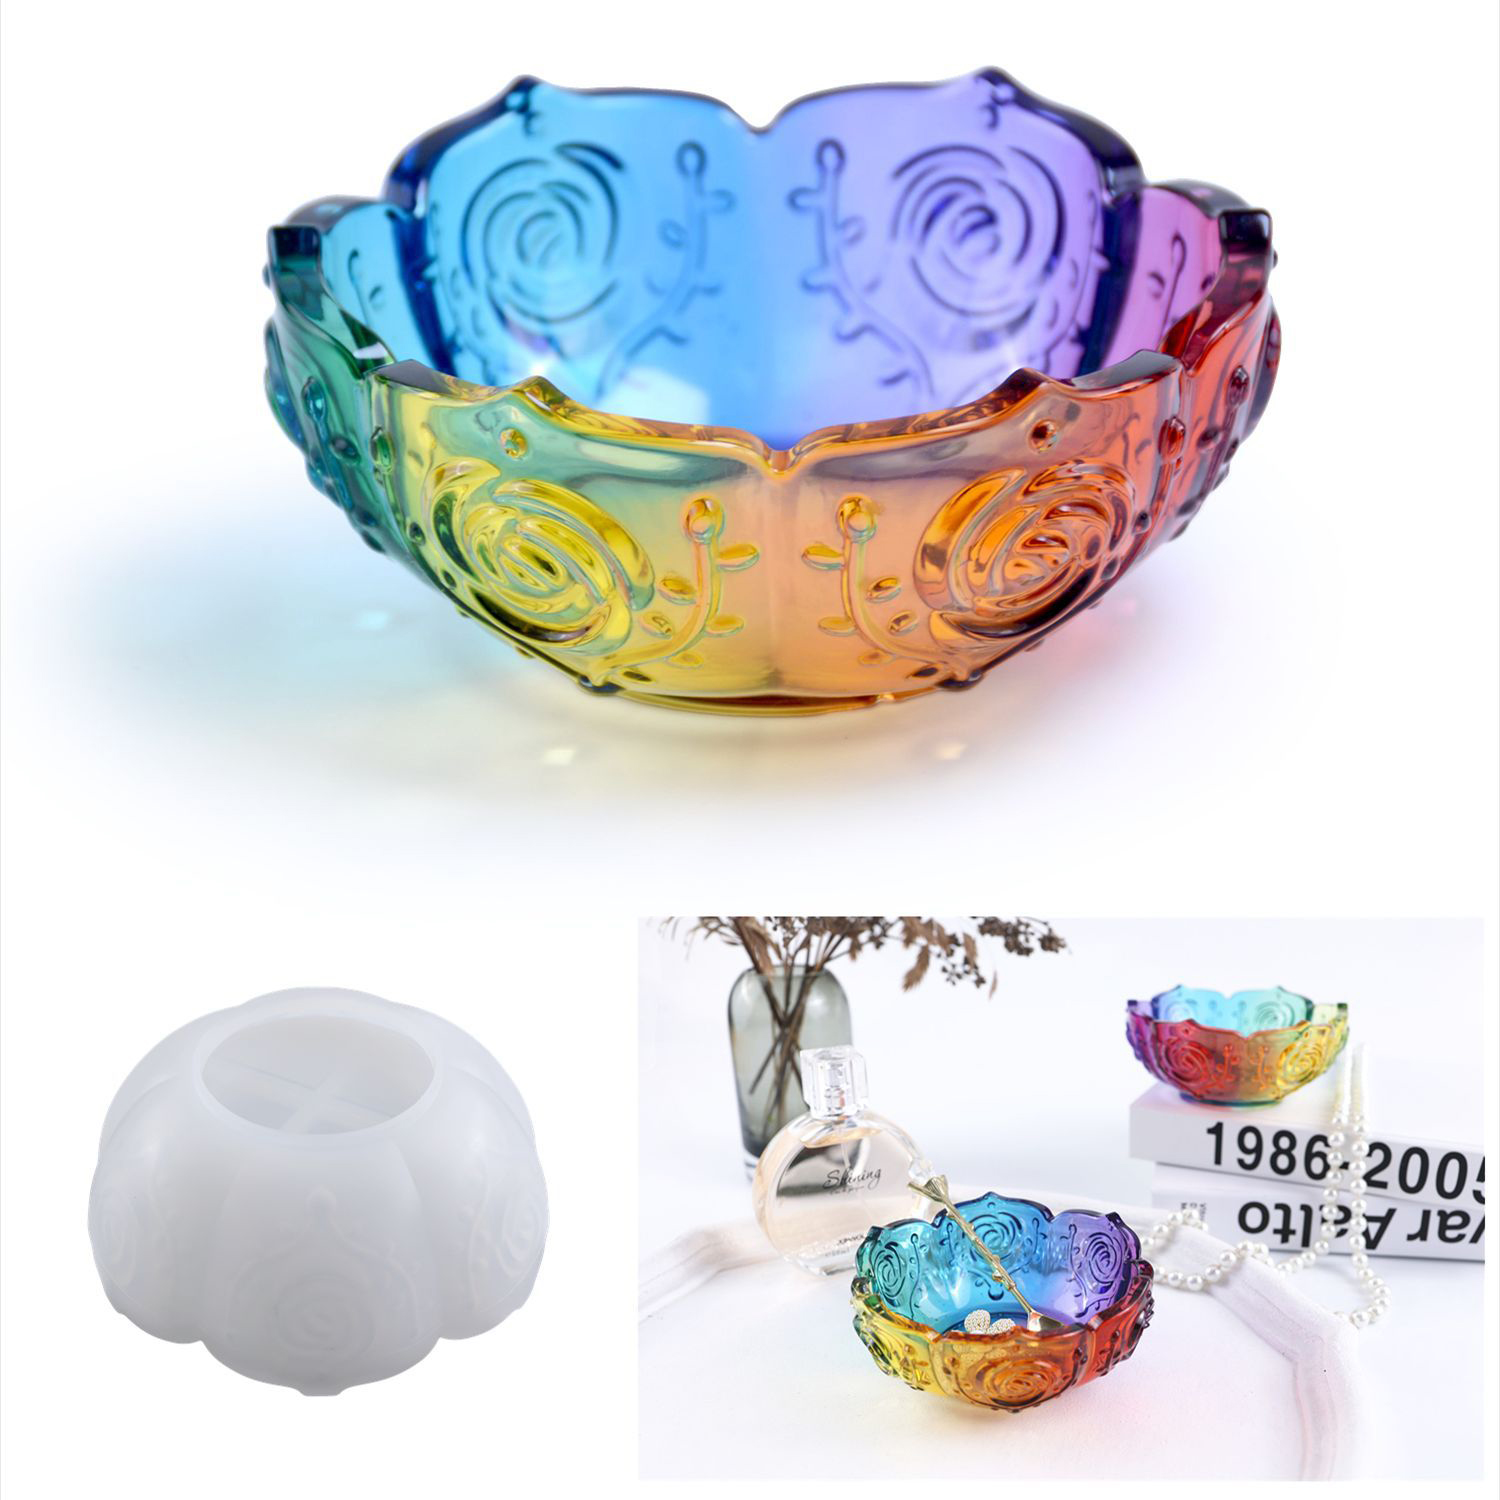 Flower Tray Resin Mold, Lotus Bowl Silicone Mold for Epoxy Resin Casting, Unique Resin Concrete Mold for DIY Jewelry Holder Trinket Container Box Candle Holder Home Table Decoration